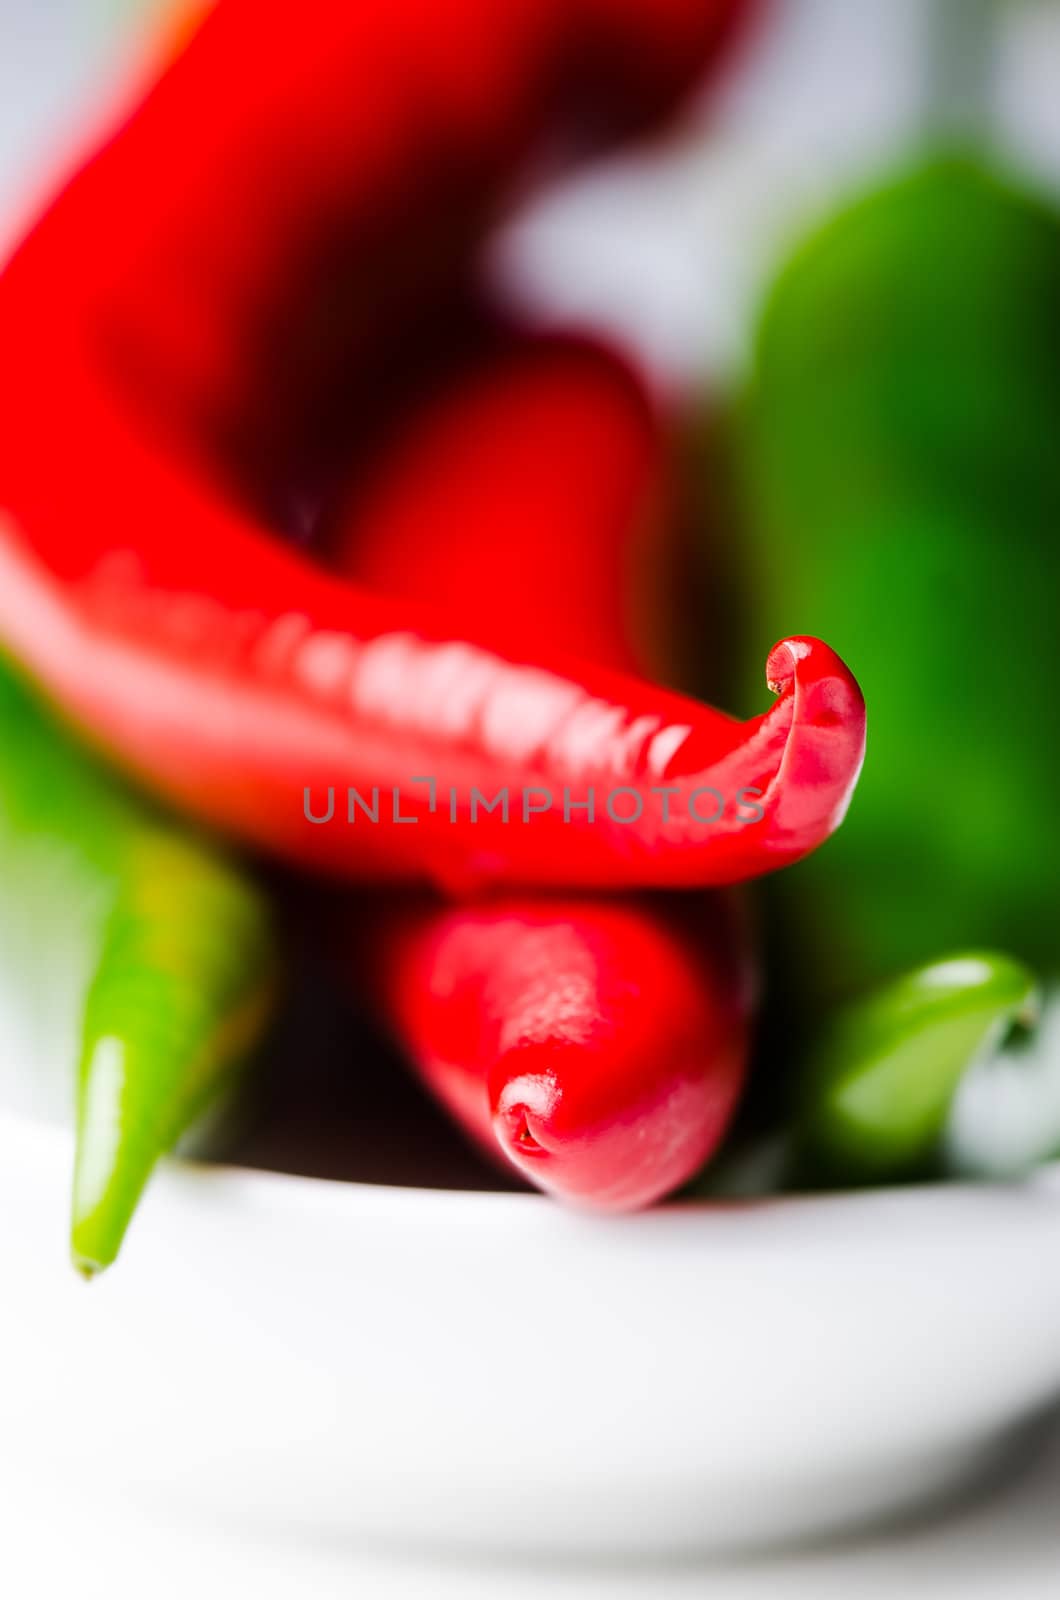 Green and red chili peppers in white bowl  by Nanisimova